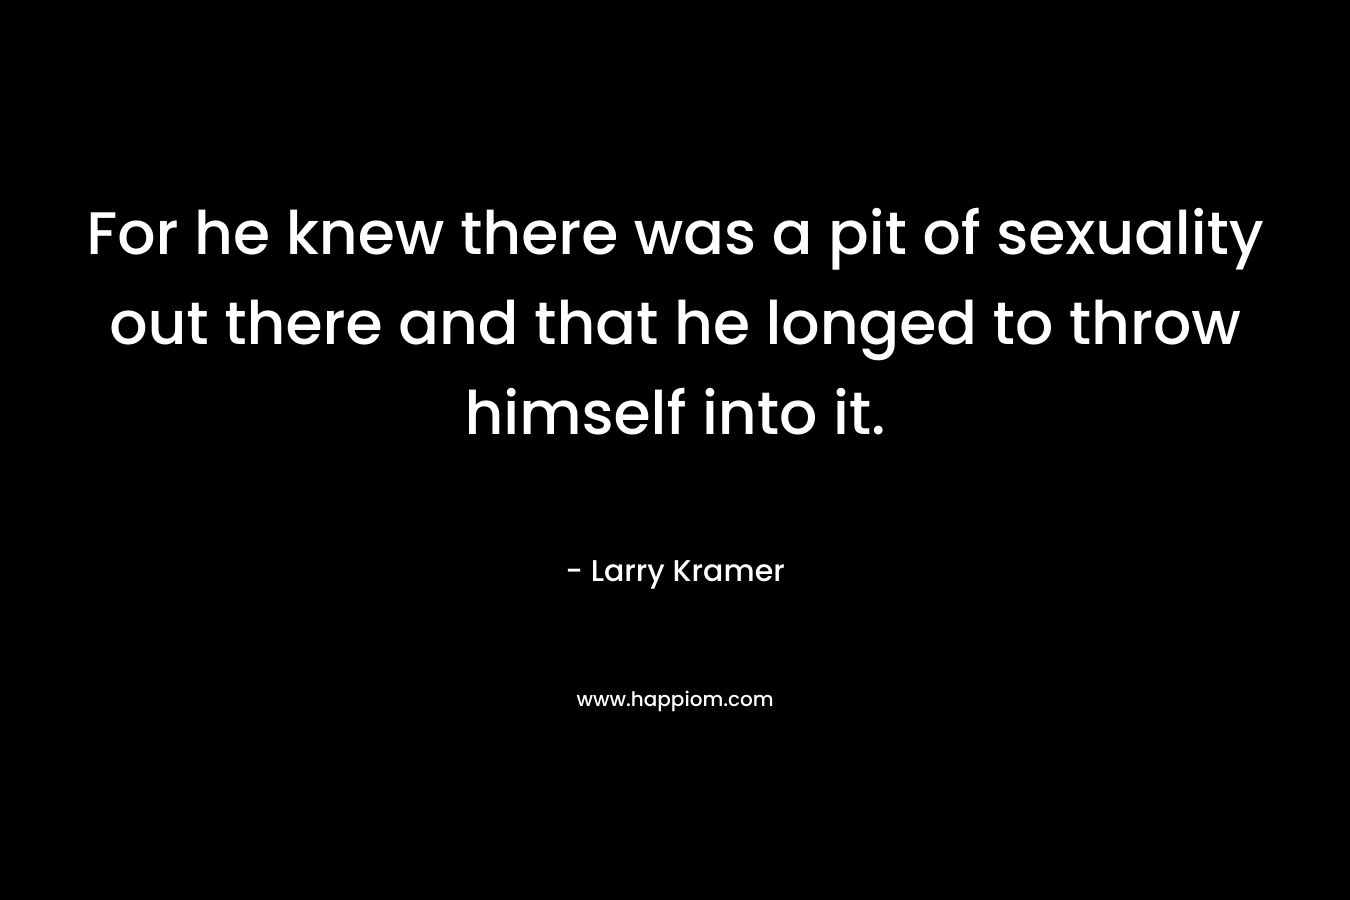 For he knew there was a pit of sexuality out there and that he longed to throw himself into it. – Larry Kramer